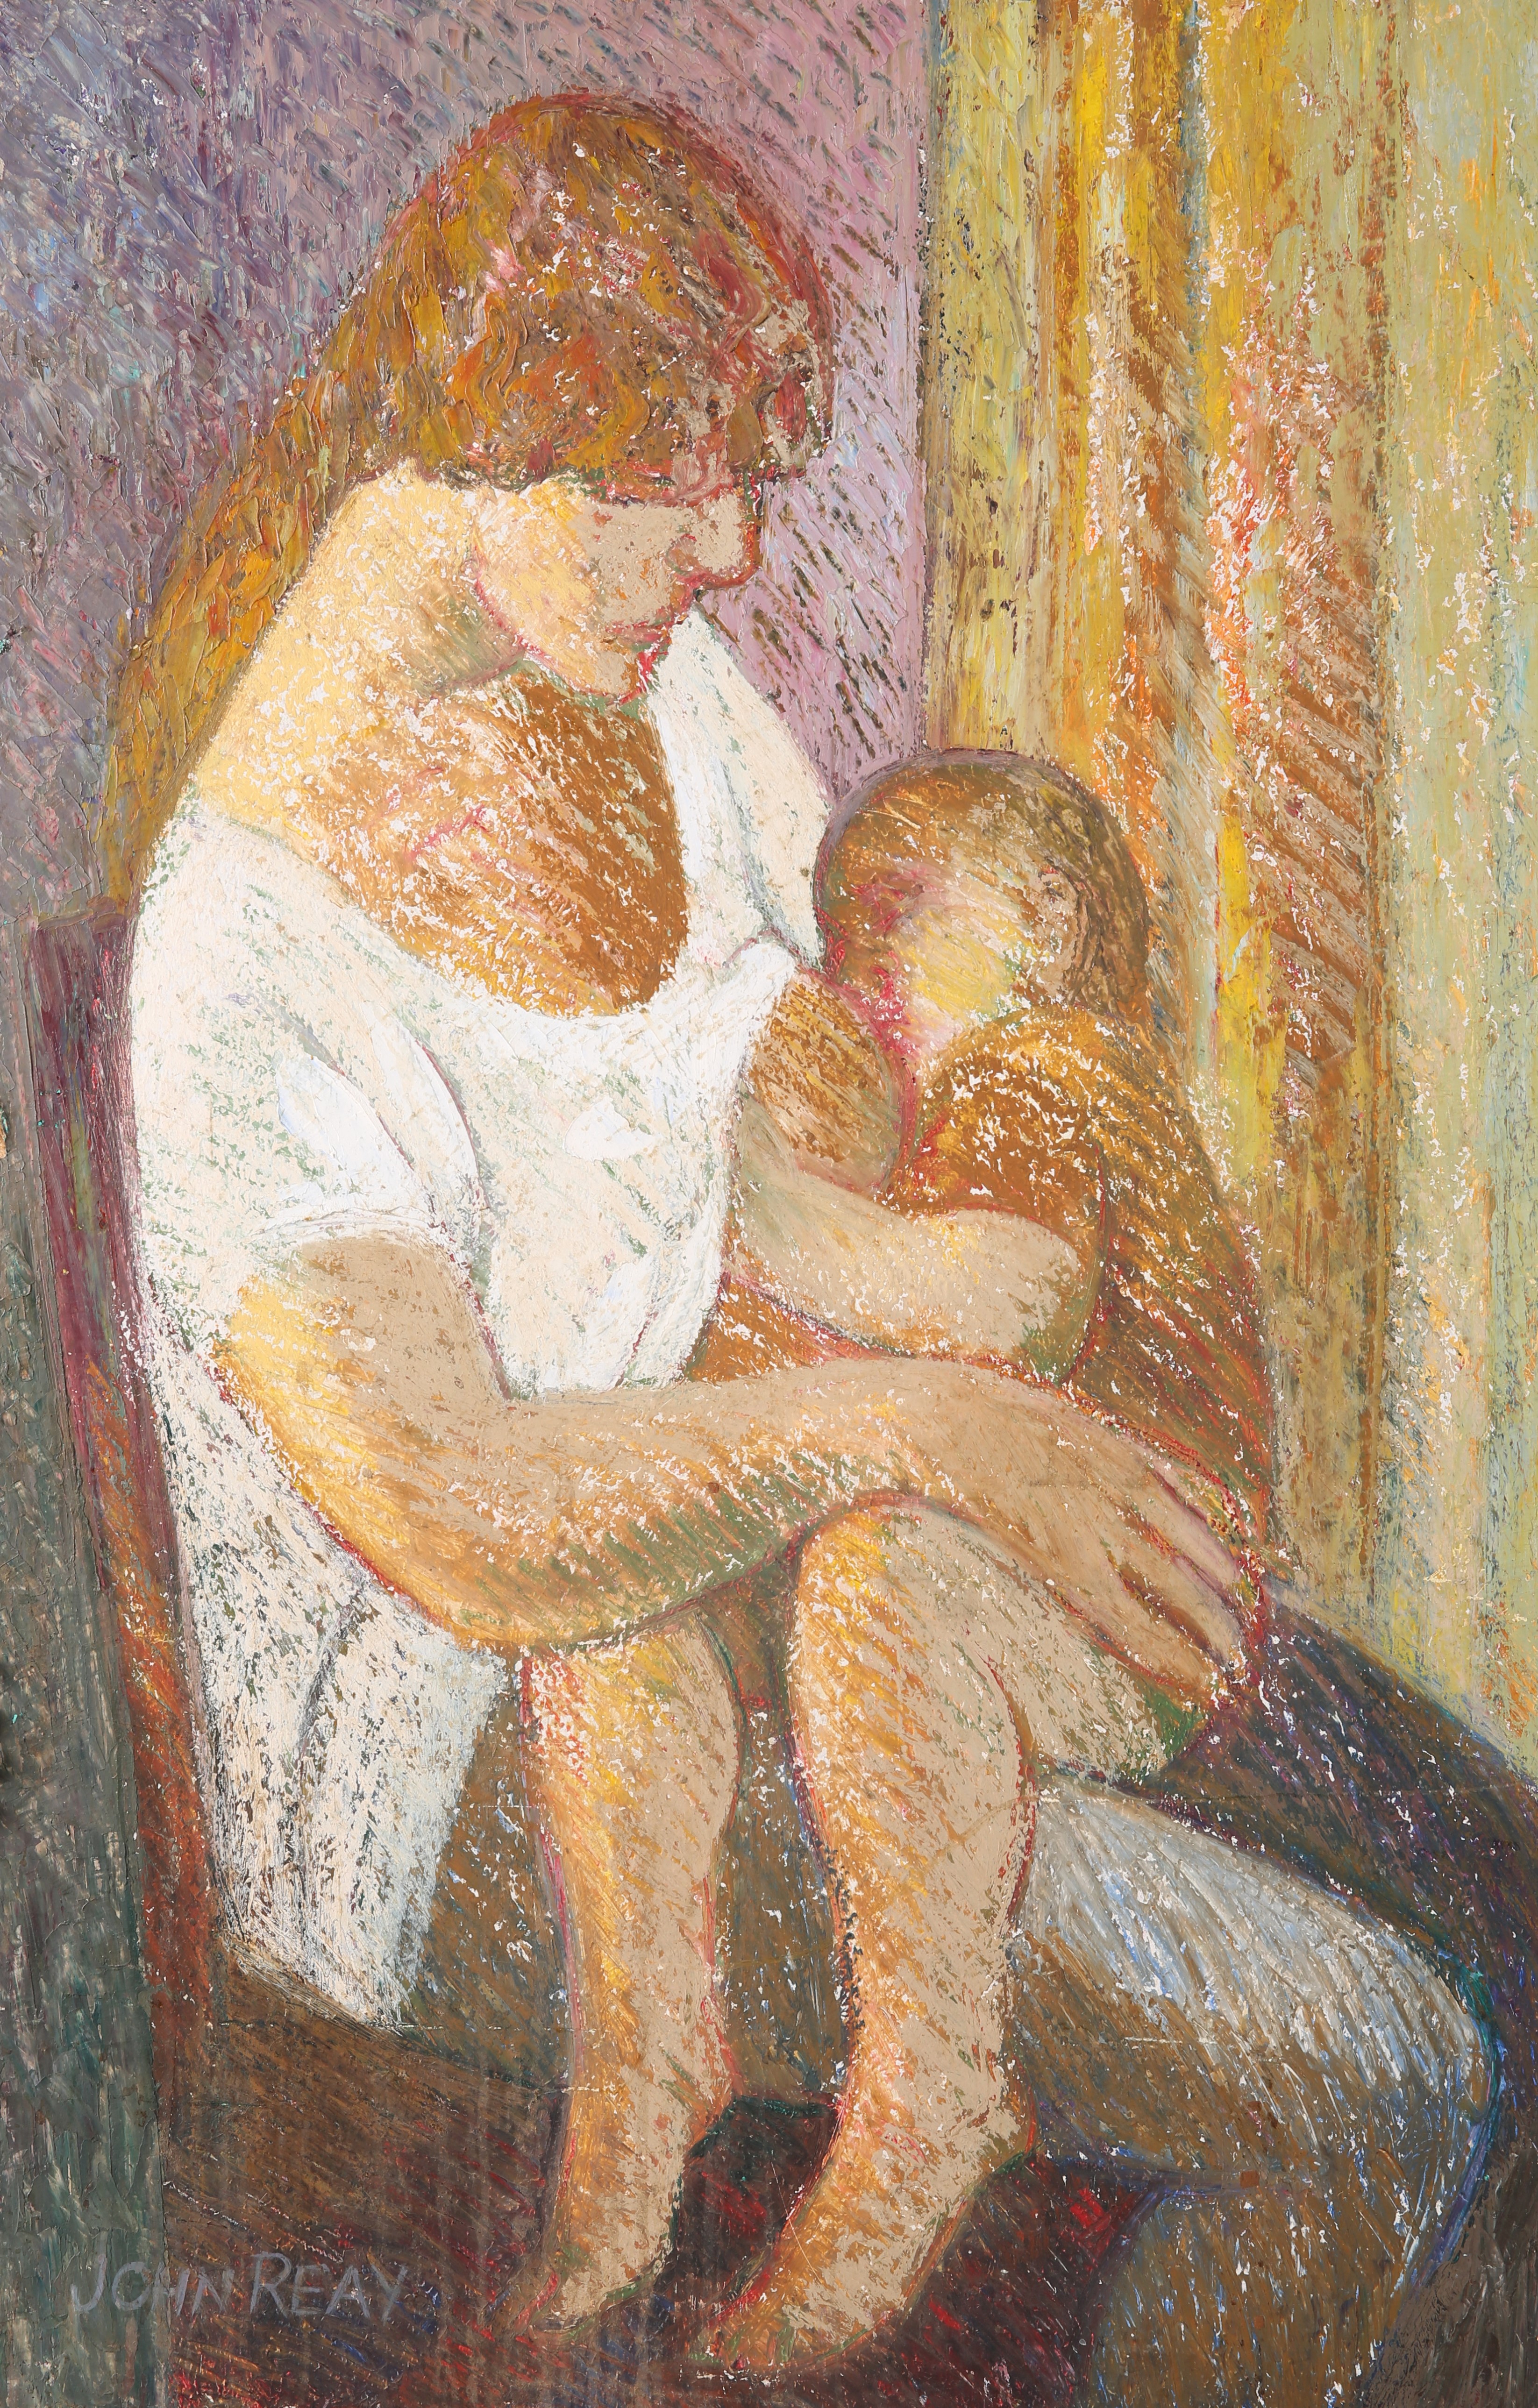 JOHN REAY, MOTHER AND CHILD